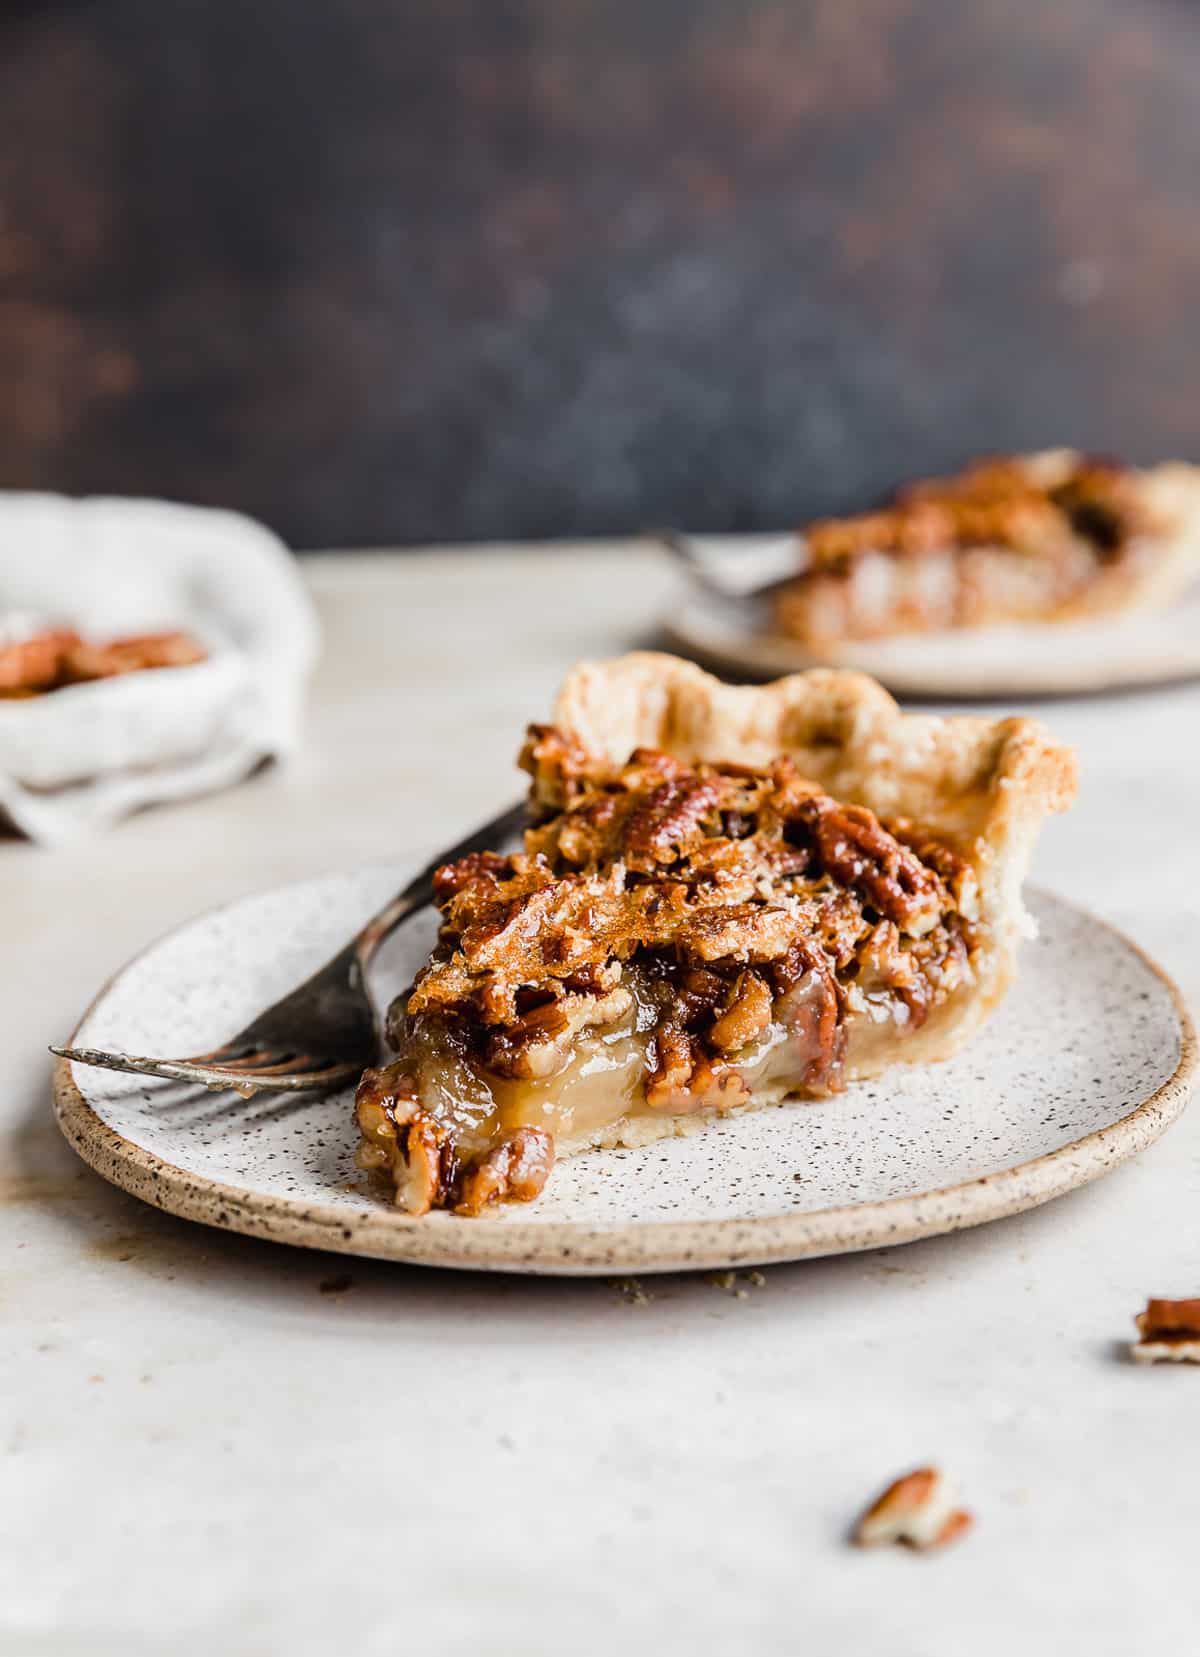 A slice of Southern Pecan Pie on a white plate with a fork to the side of the pie.